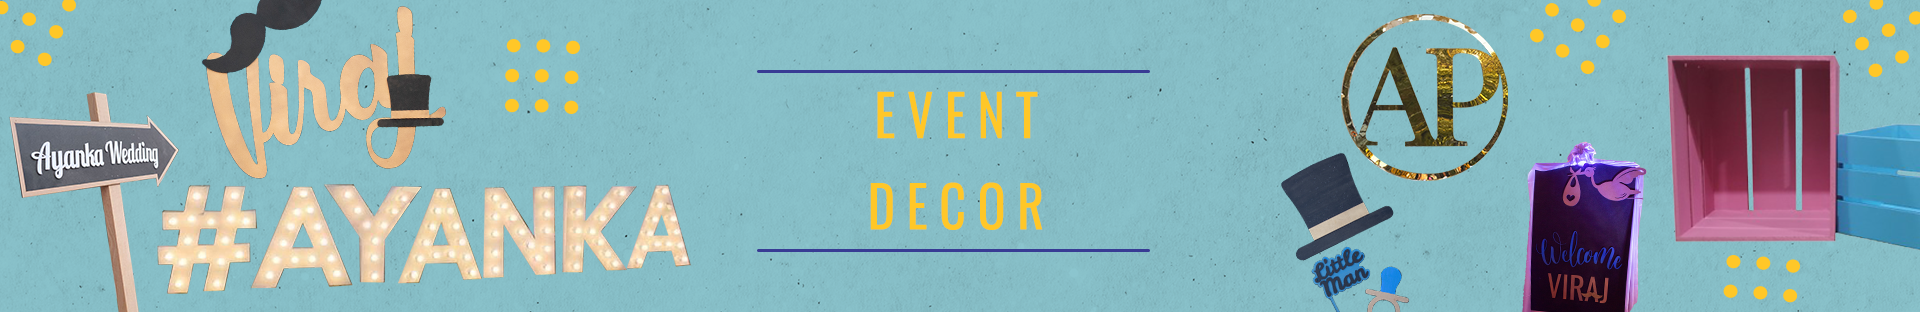 eventdecors_banners 